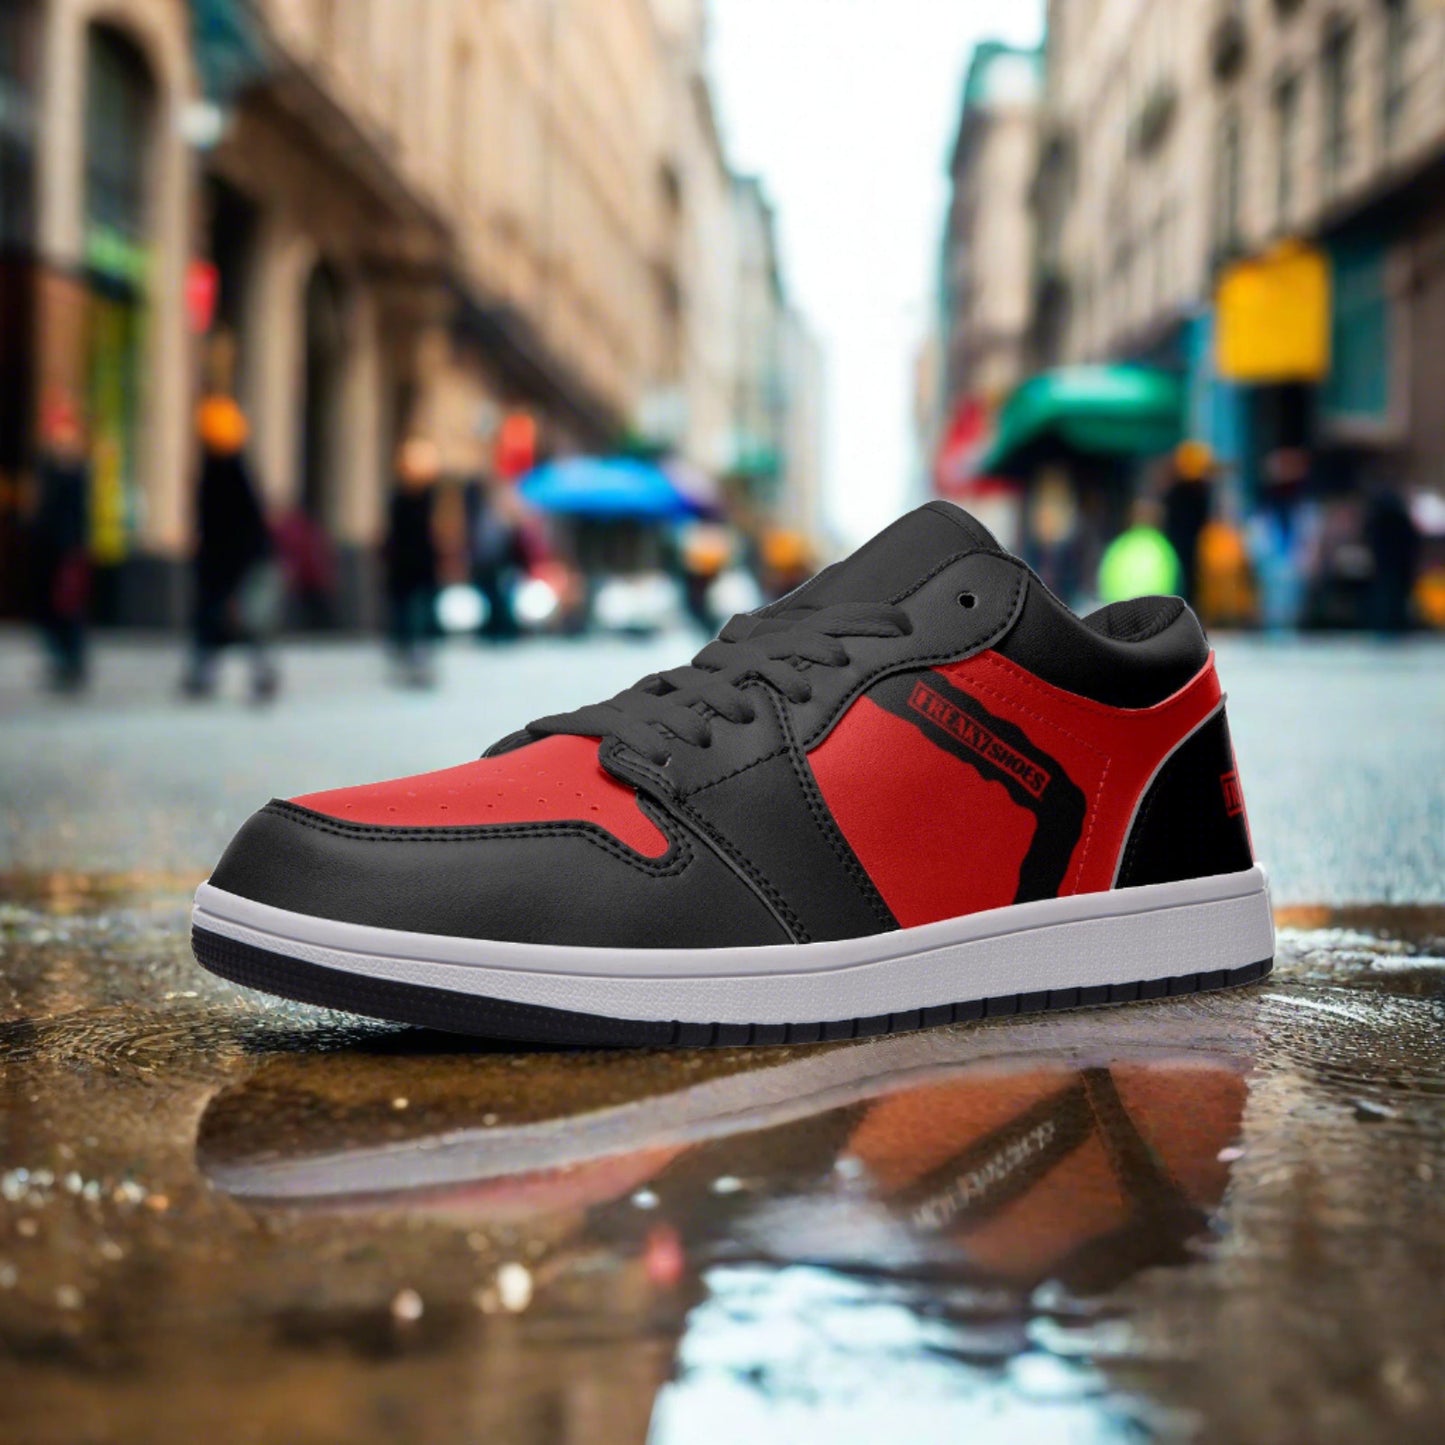 Freaky Shoes® Red & Black Unisex Low Top Leather Sneakers